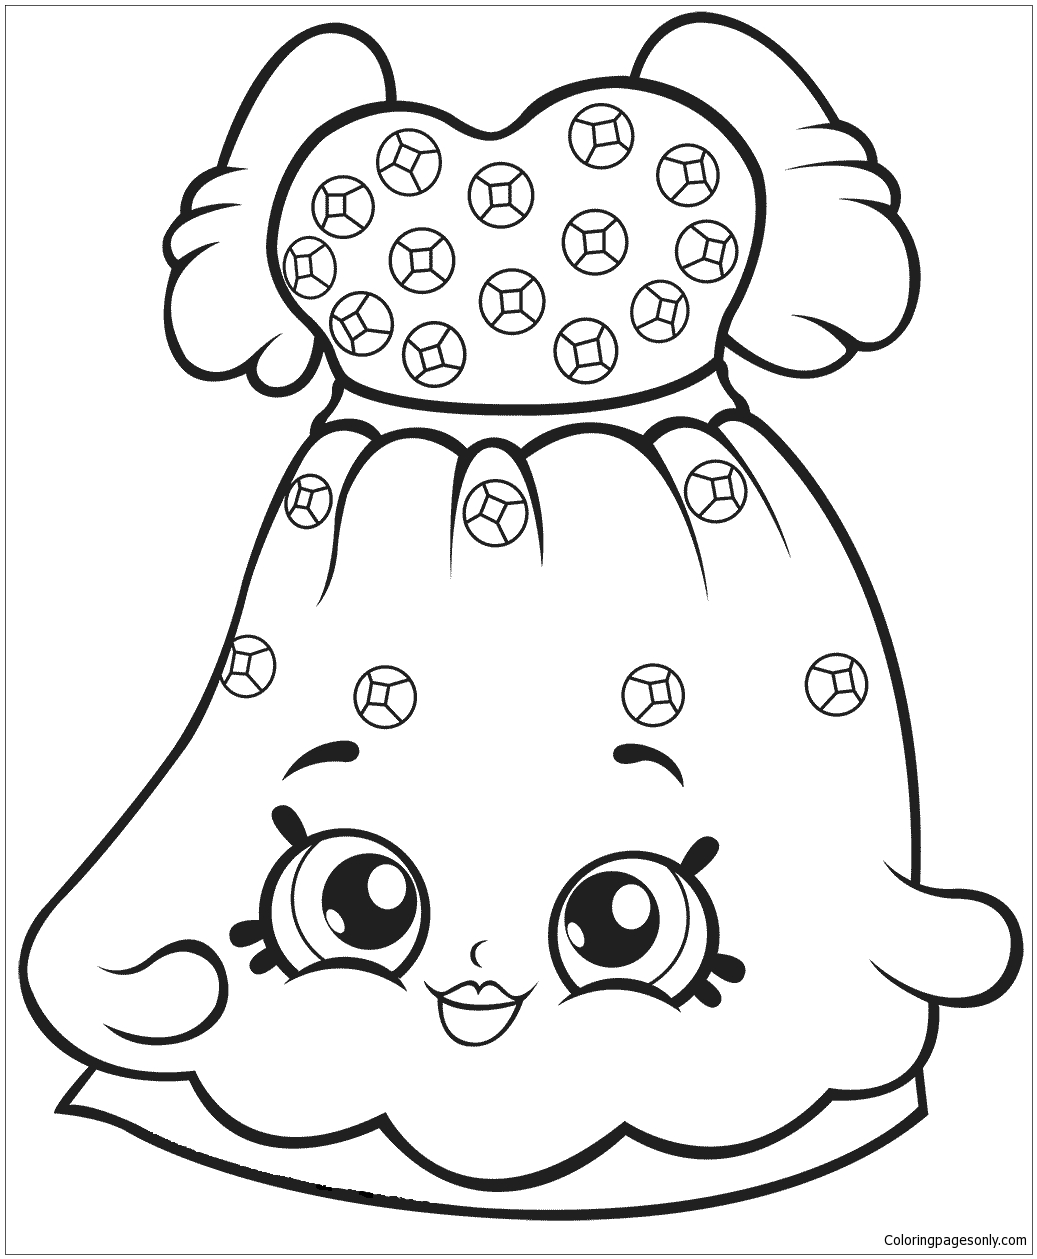 Shopkins Cute Coloring Pages - Toys and Dolls Coloring ...